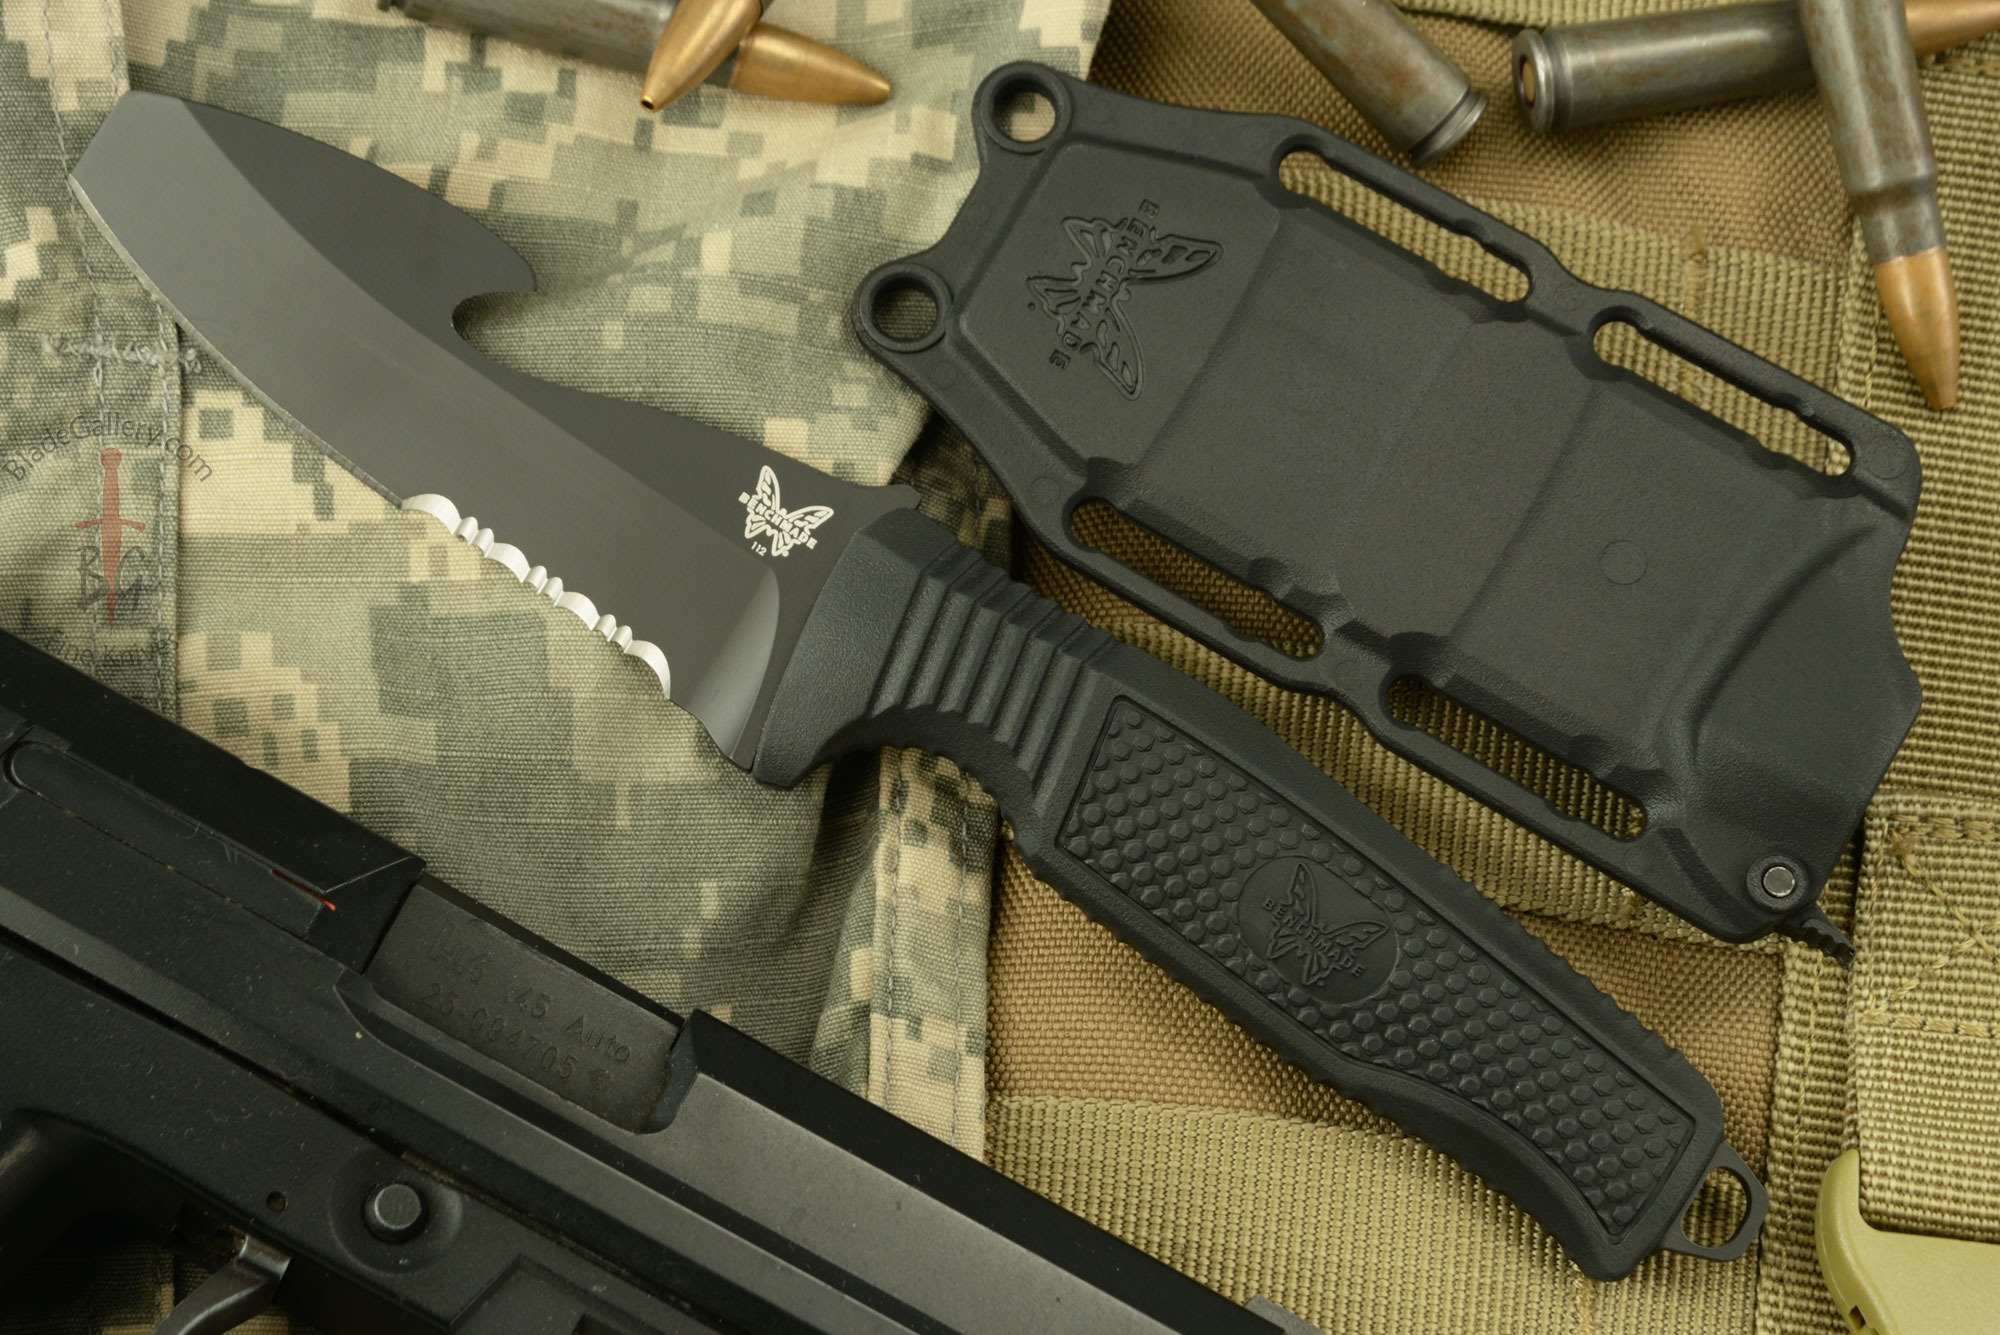 Knives made for saltwater use, Extreme corrosive resistant